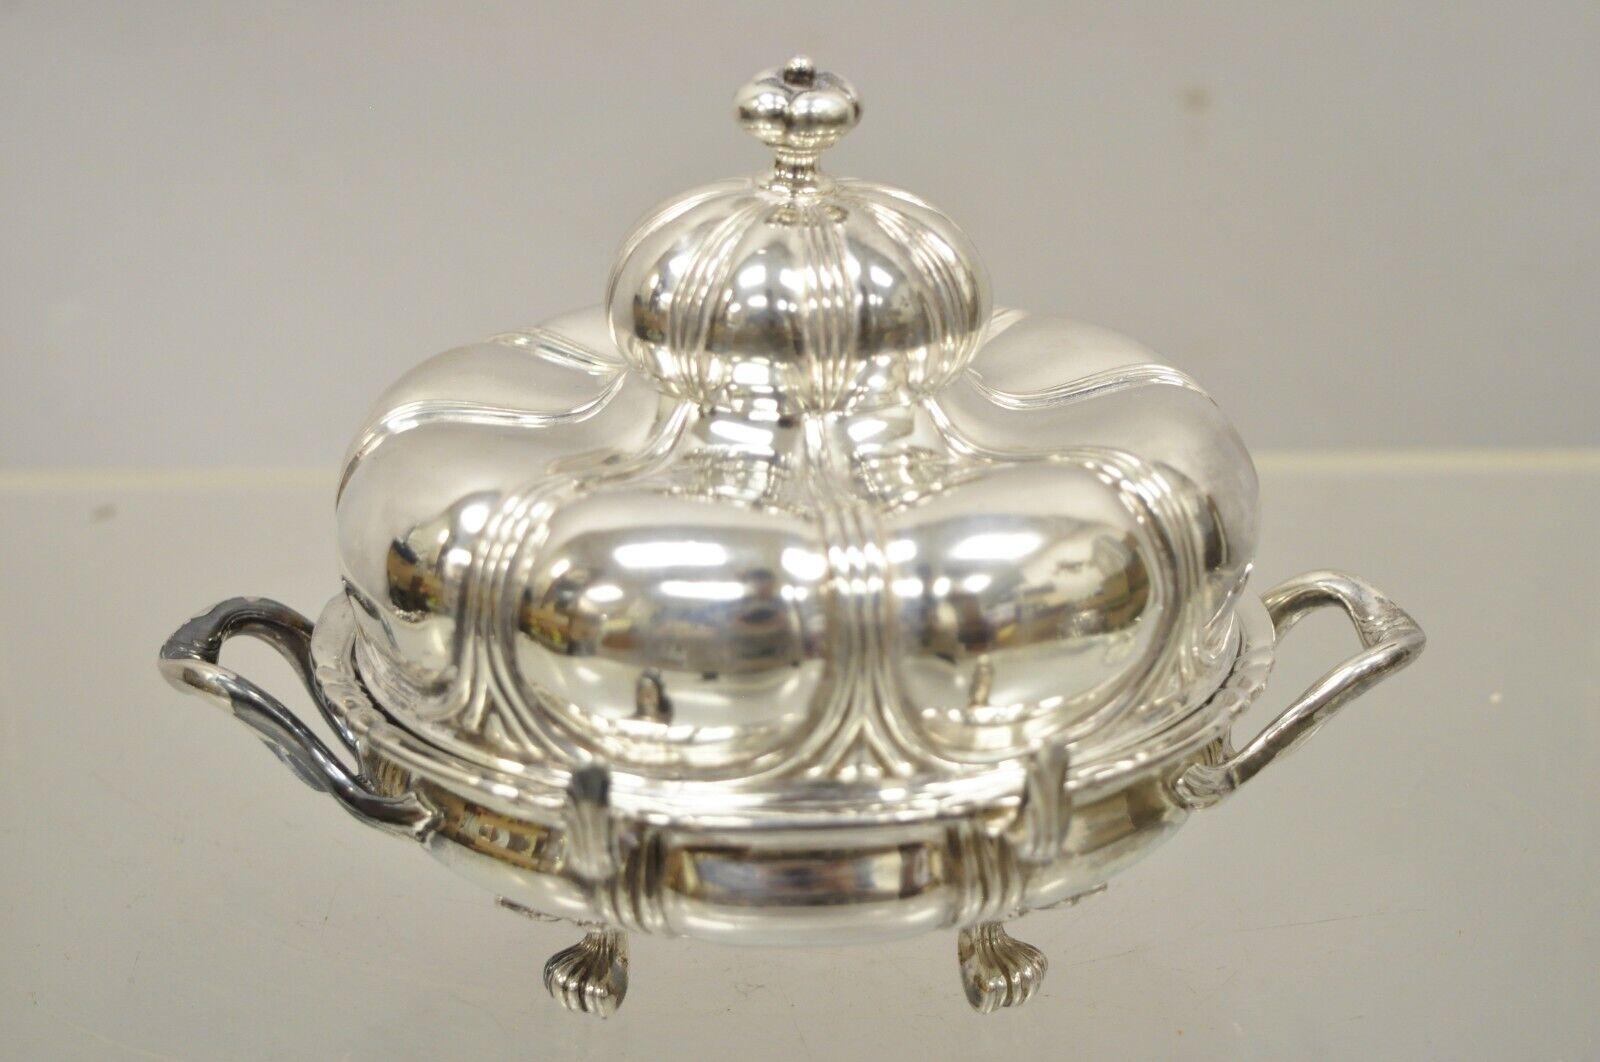 Vintage pairpoint silver plated covered butter bowl covered dish with glass.
Item features a 